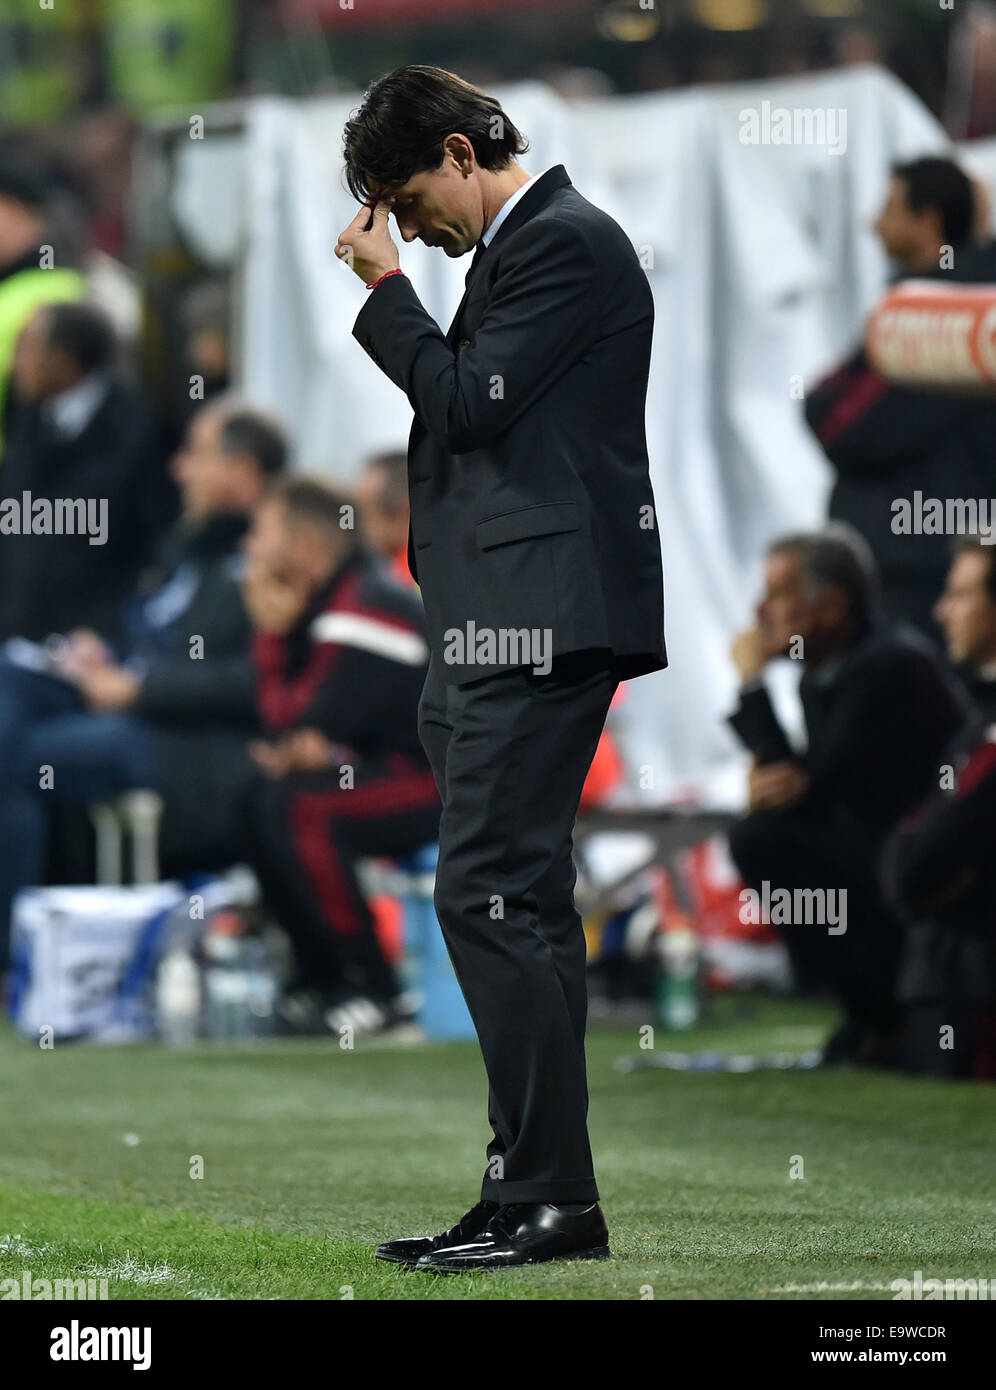 Milan, Italy. 2nd Nov, 2014. Filippo Inzaghi, head coach of AC Milan, reacts during the Serie A football match against Palermo in Milan, Italy, on Nov. 2, 2014. AC Milan lost 0-2. © Alberto Lingria/Xinhua/Alamy Live News Stock Photo